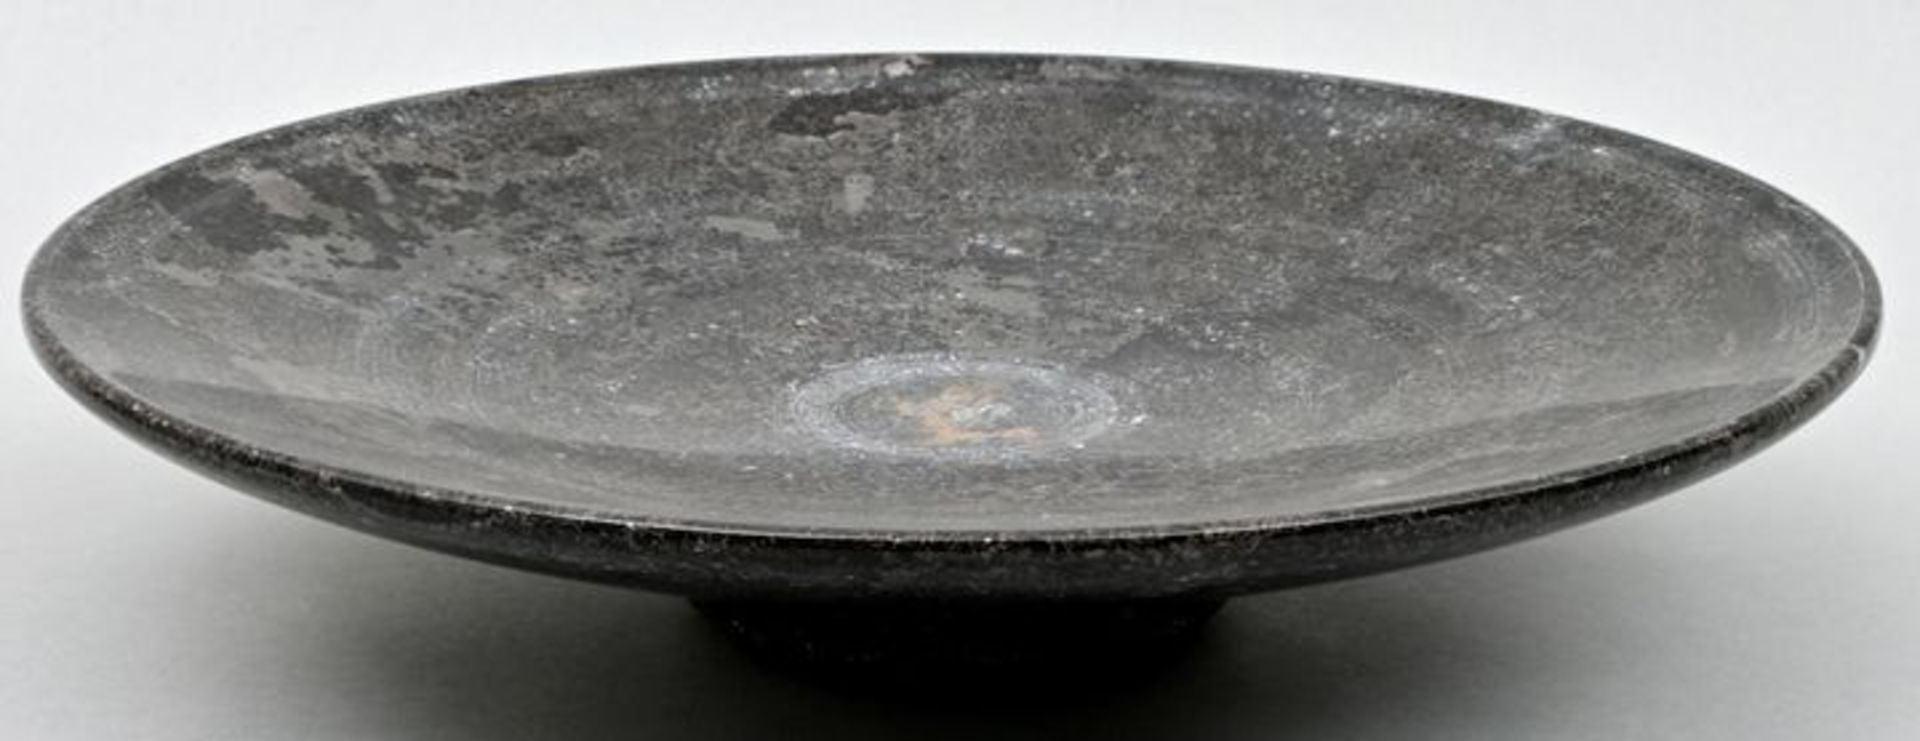 Steinschale / Bowl from stone